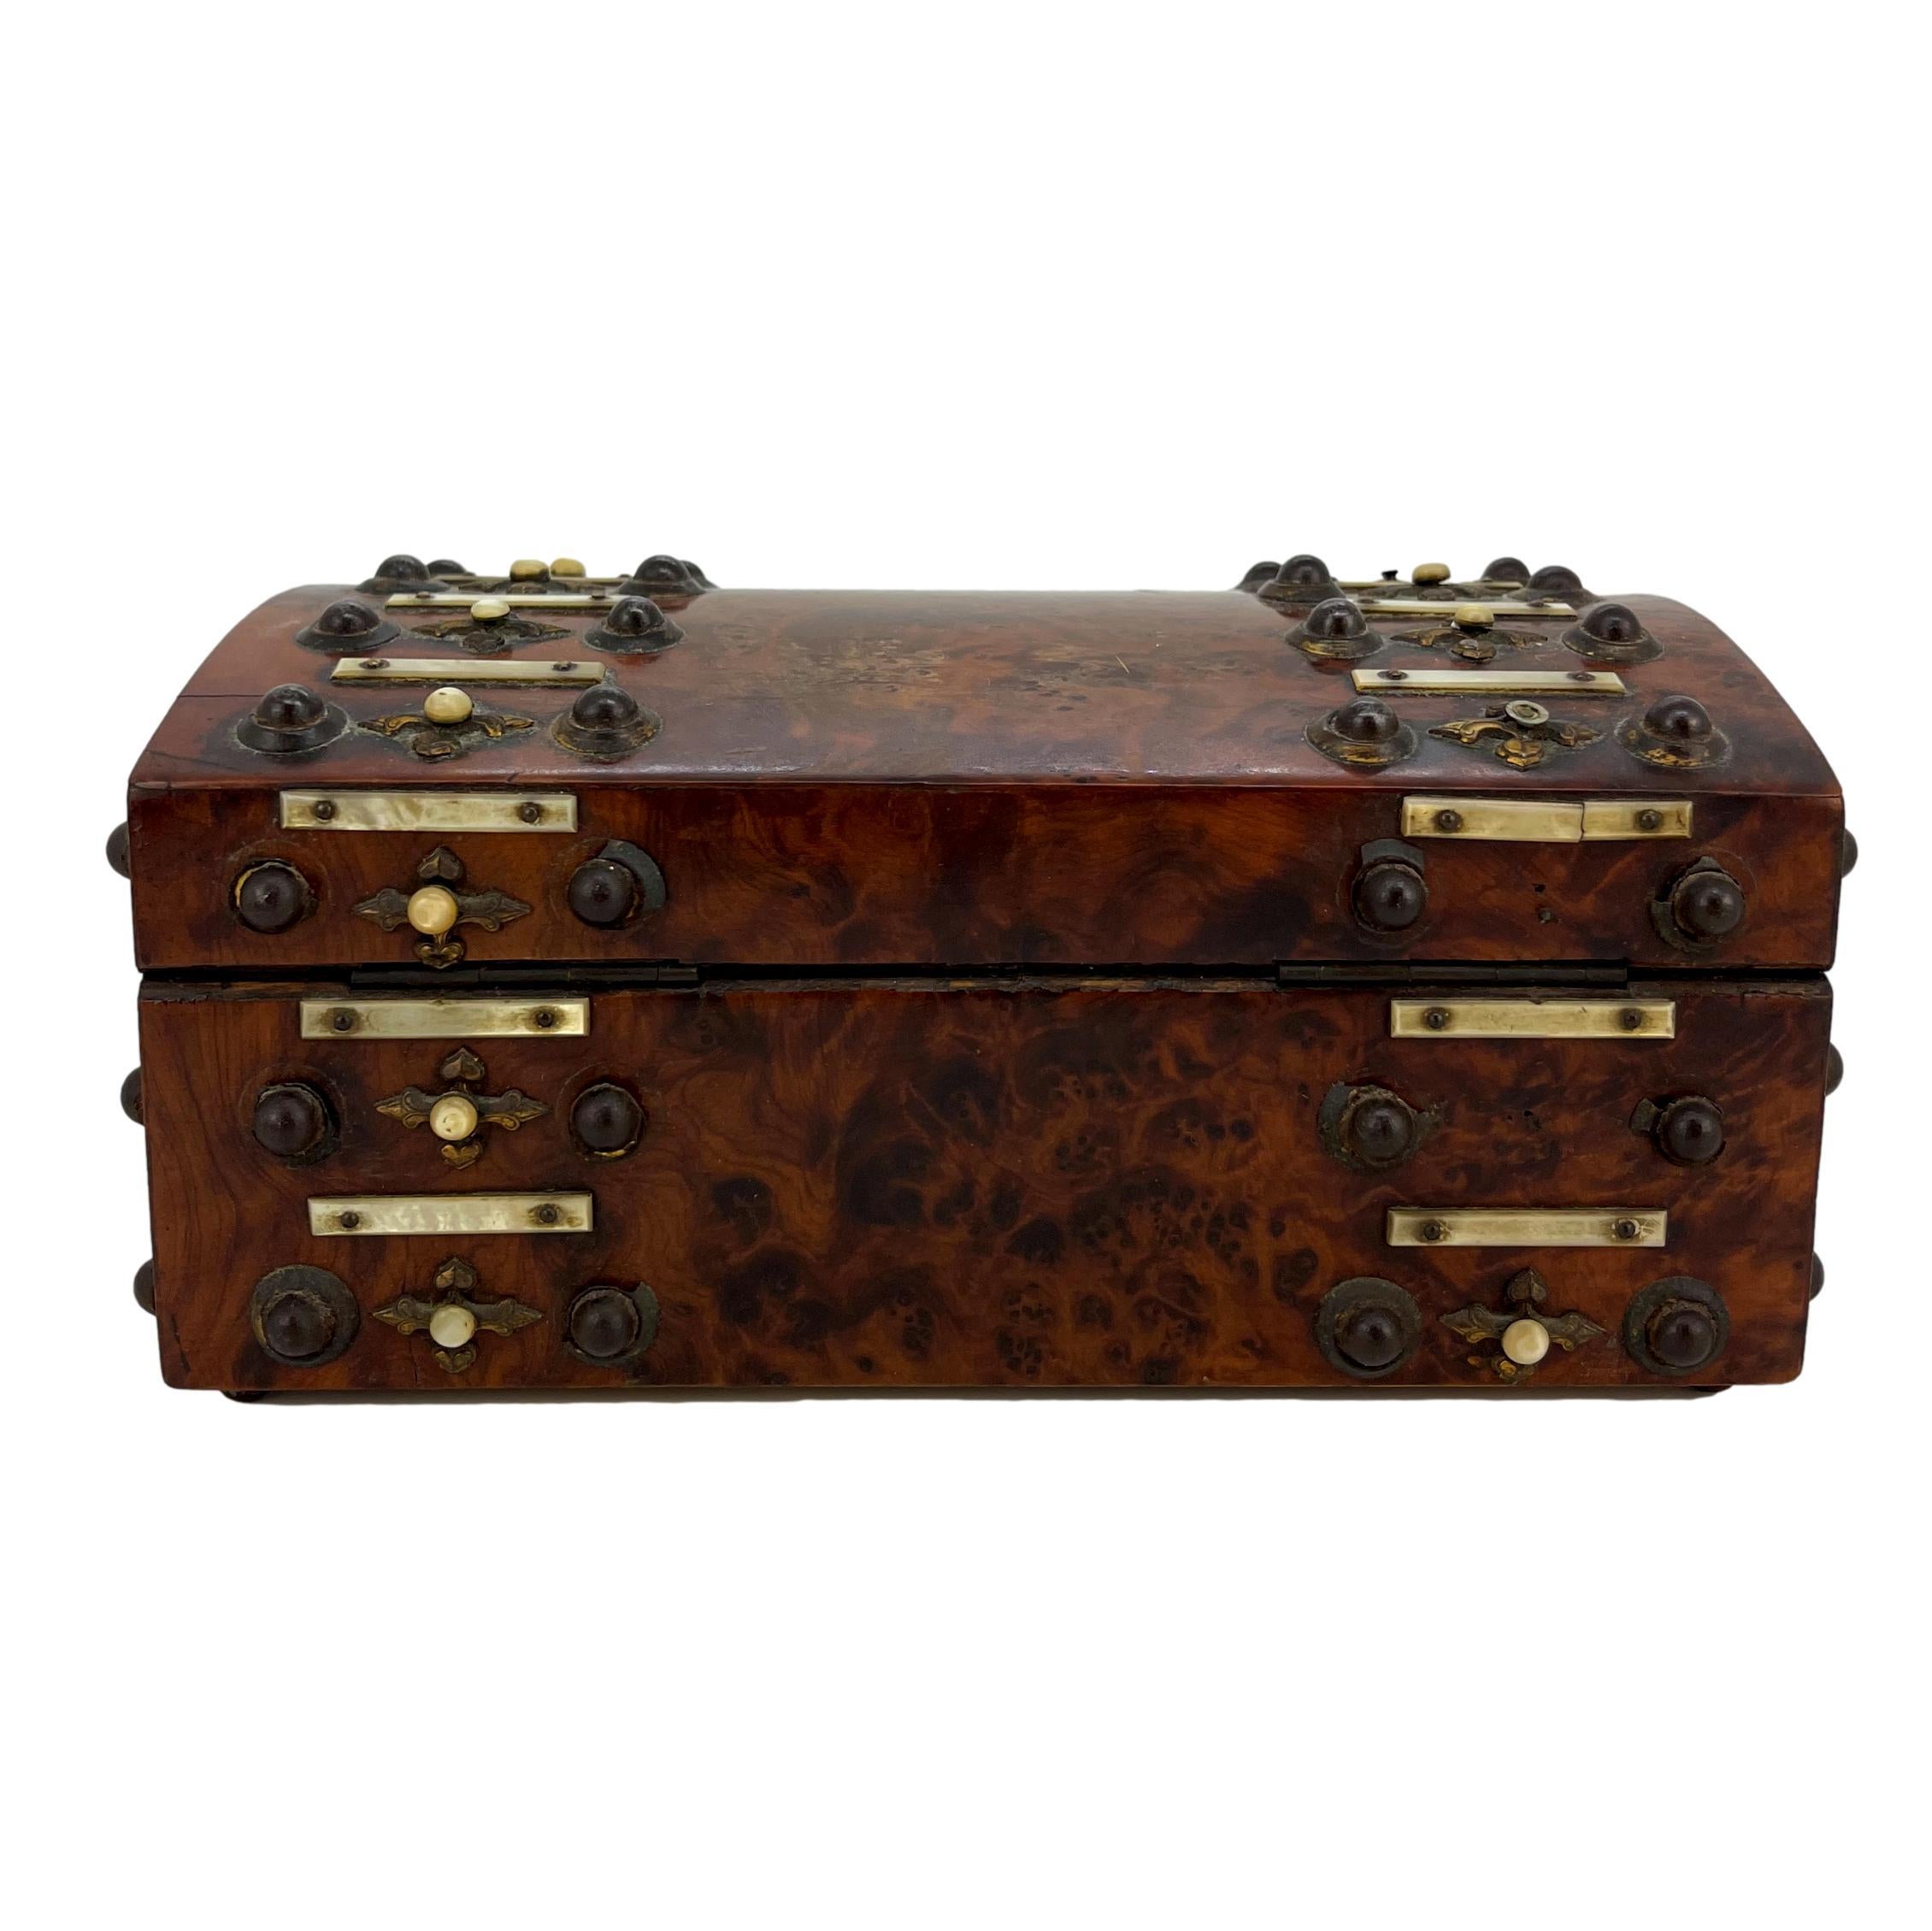 Hand-Crafted Burl Walnut and Brass Dome-Top Box with Mother-of-Pearl, English, ca. 1860 For Sale